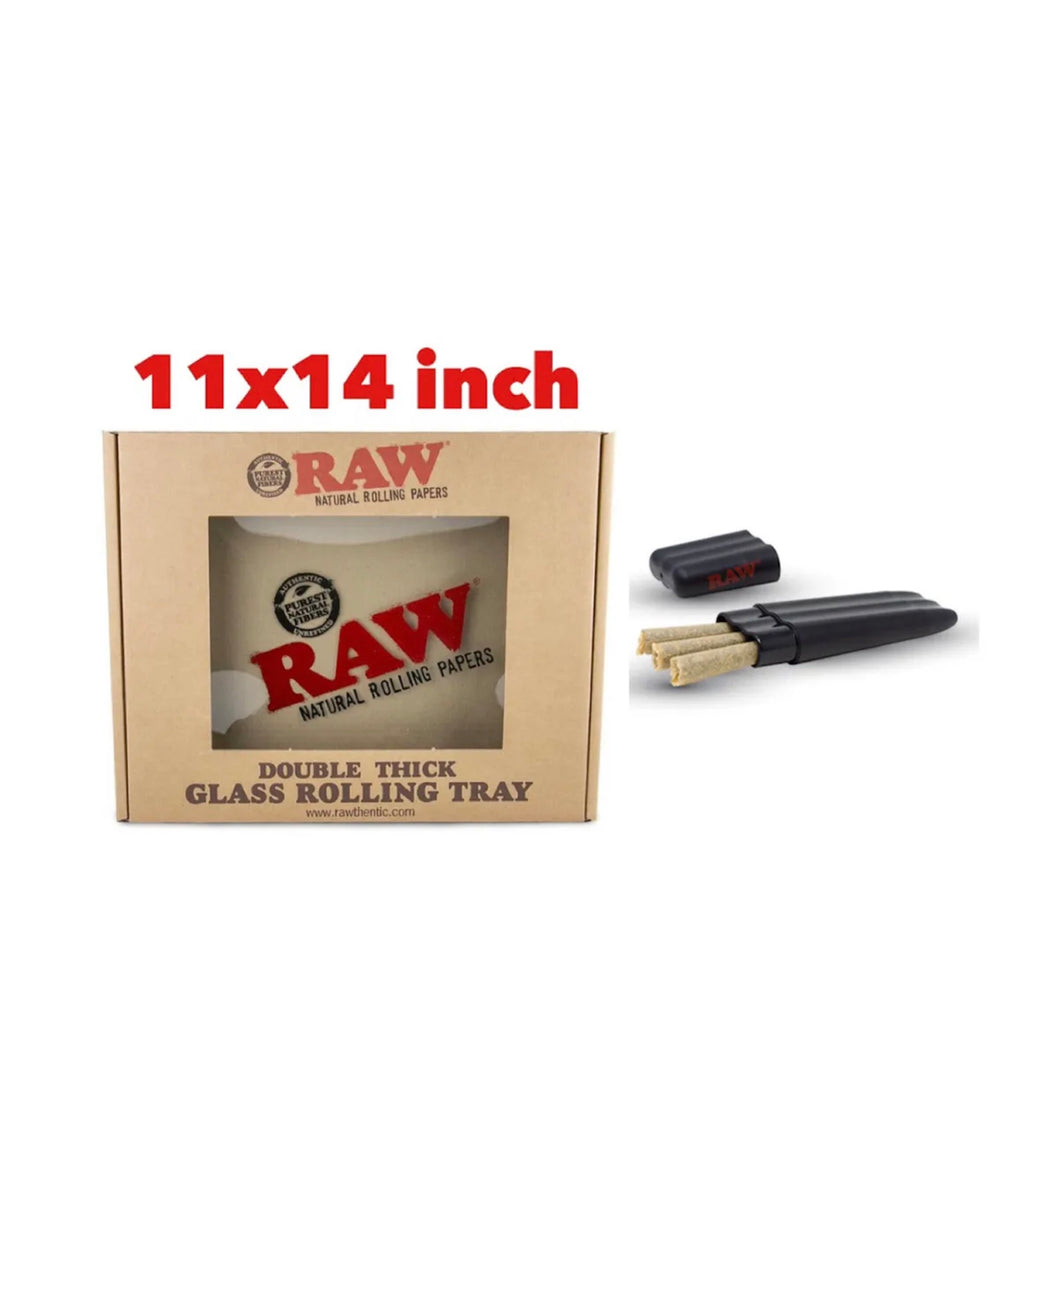 RAW DOUBLE THICK GLASS ROLLING TRAY 11”x14”- LARGE+raw three tree cone case